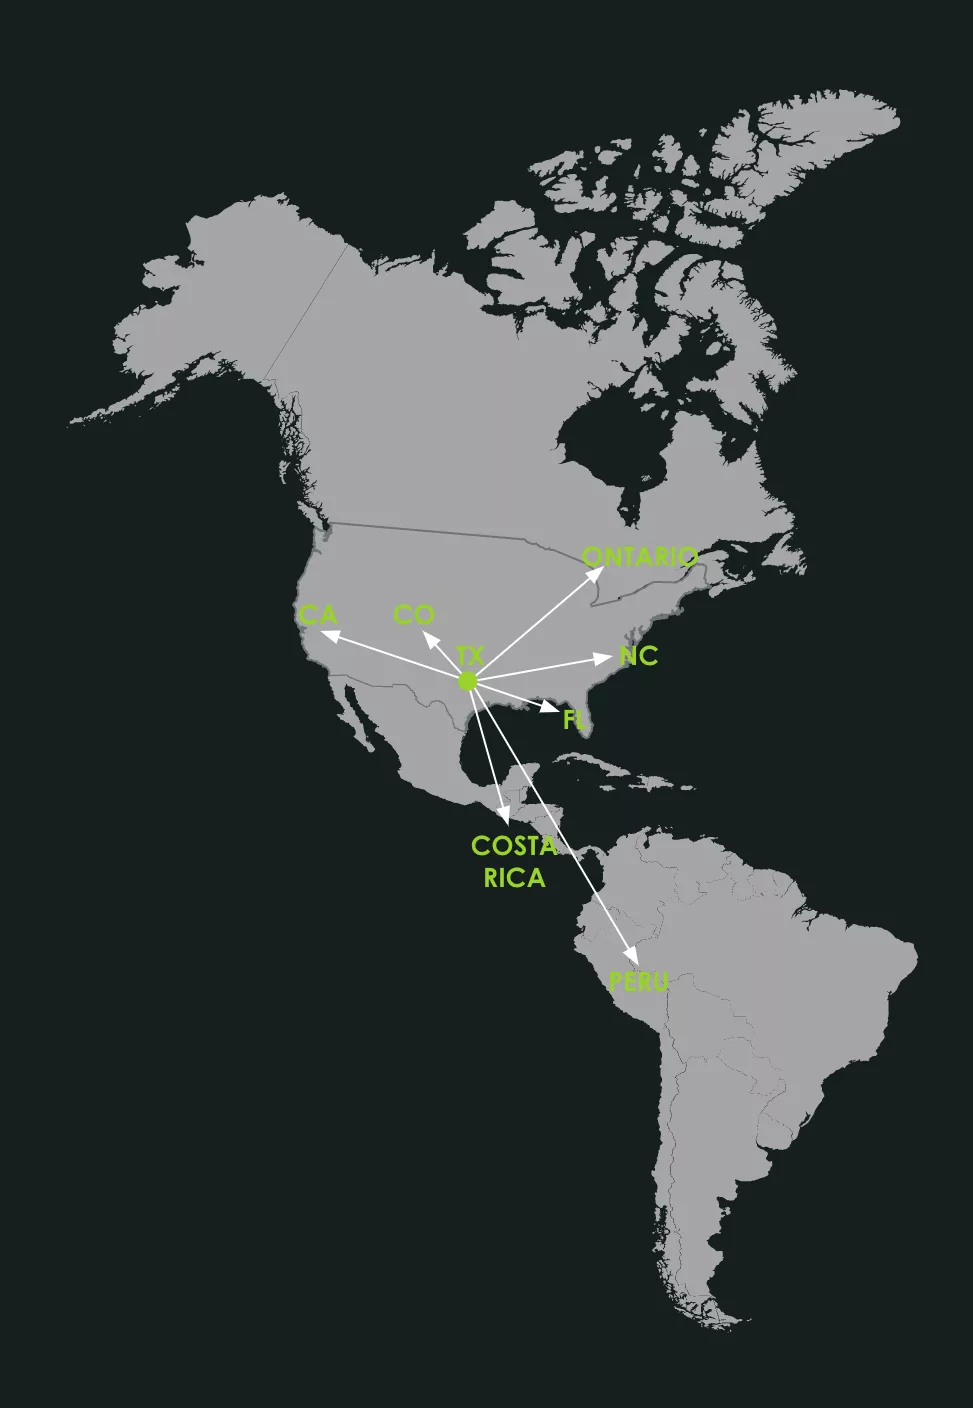 limebox locations in north america and south america